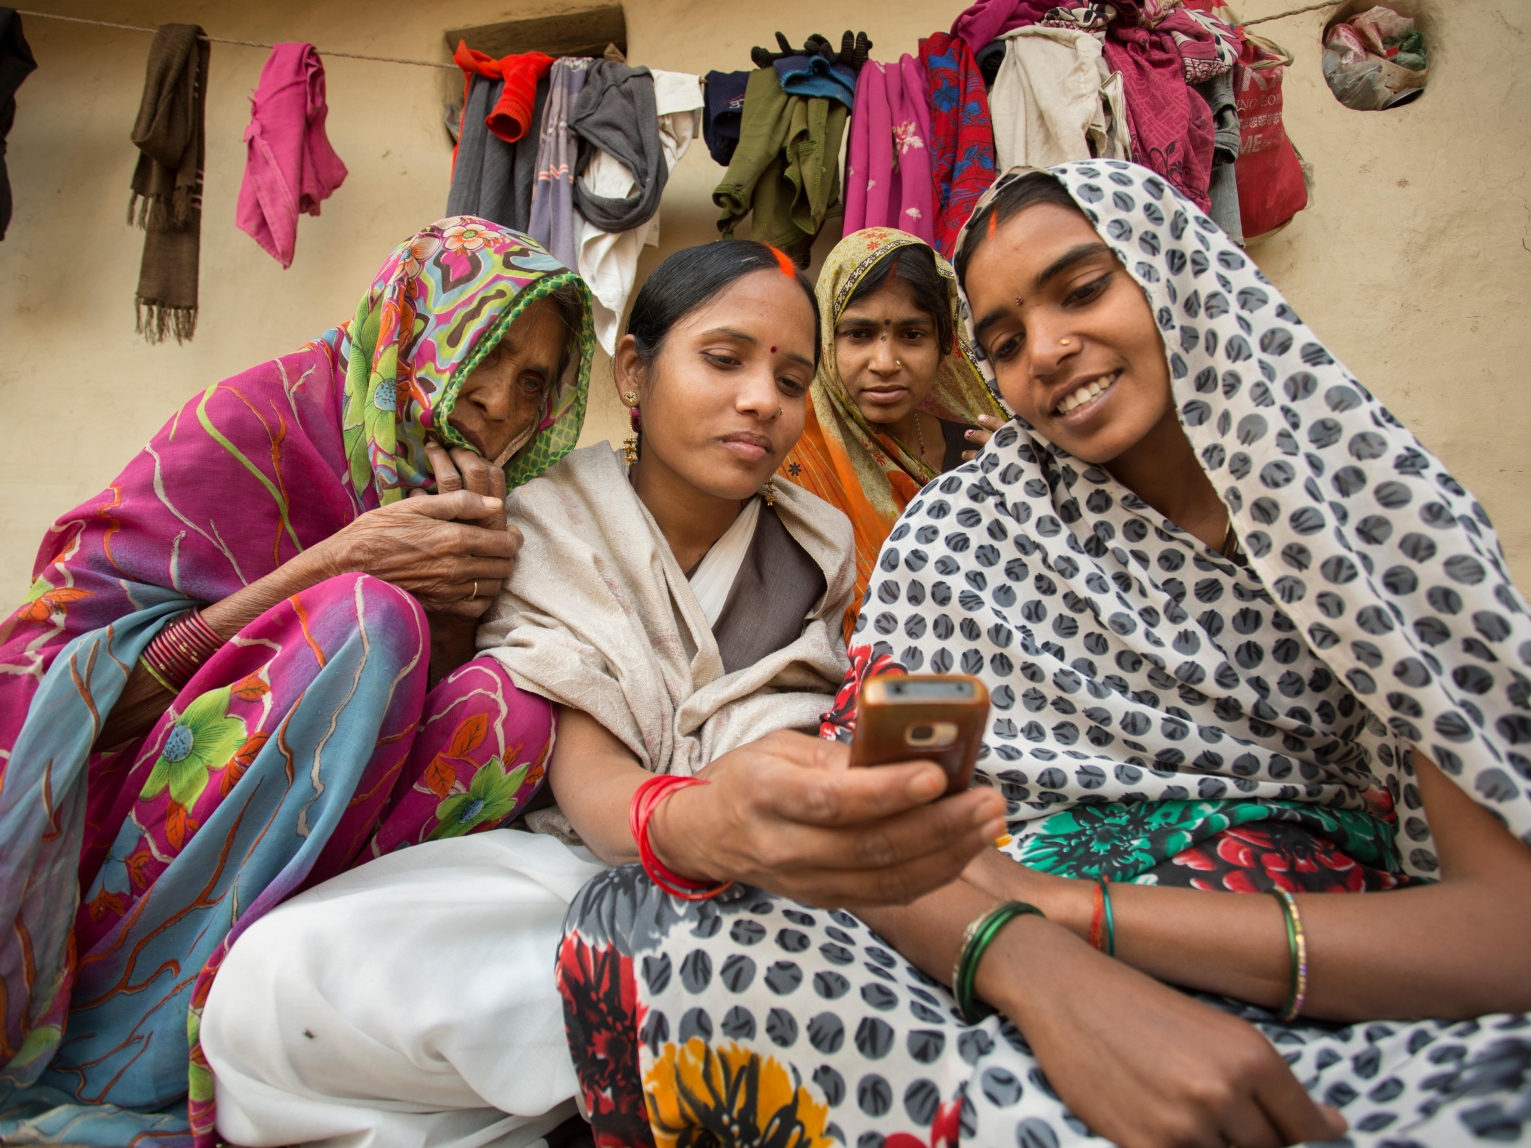 Smartphone use has exploded in India